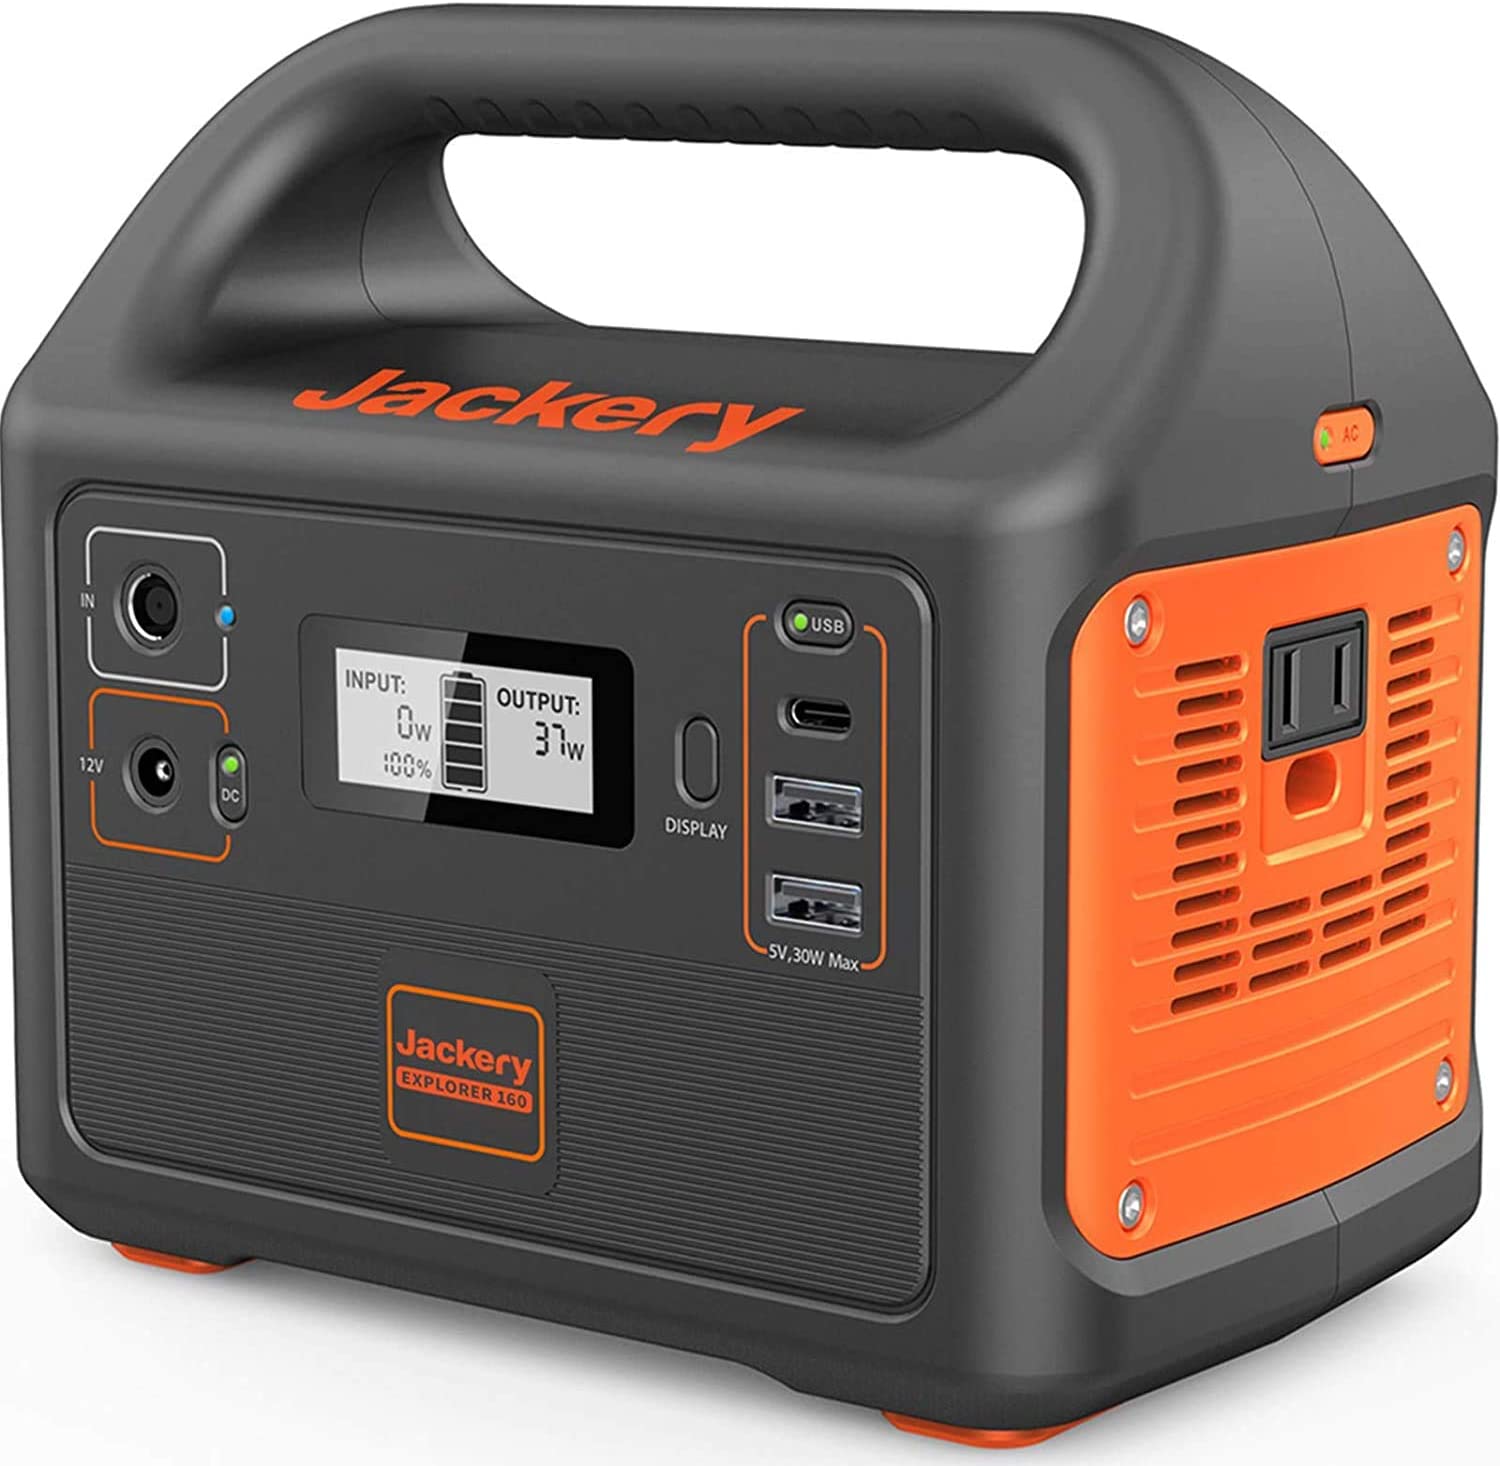 Jackery Portable Power Station Explorer 160, 167Wh Lithium Battery Solar Generator  Amazon Prime Day Lighting Deal! Extra Savings $111.99 20% off total! Backup Power Supply